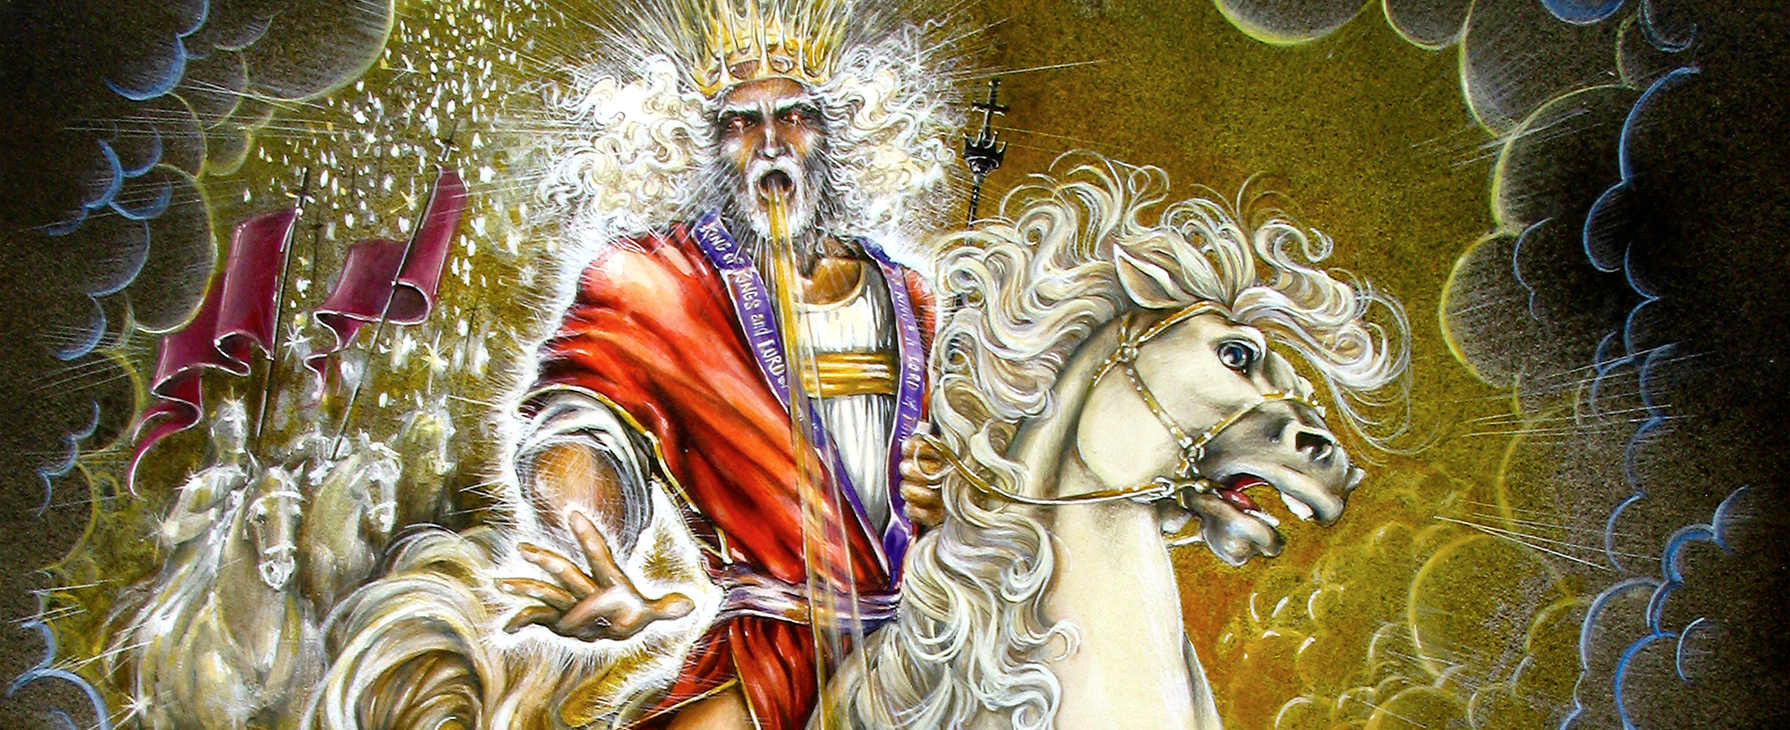 The Book of Revelation: An Illustrated Timeline hero image